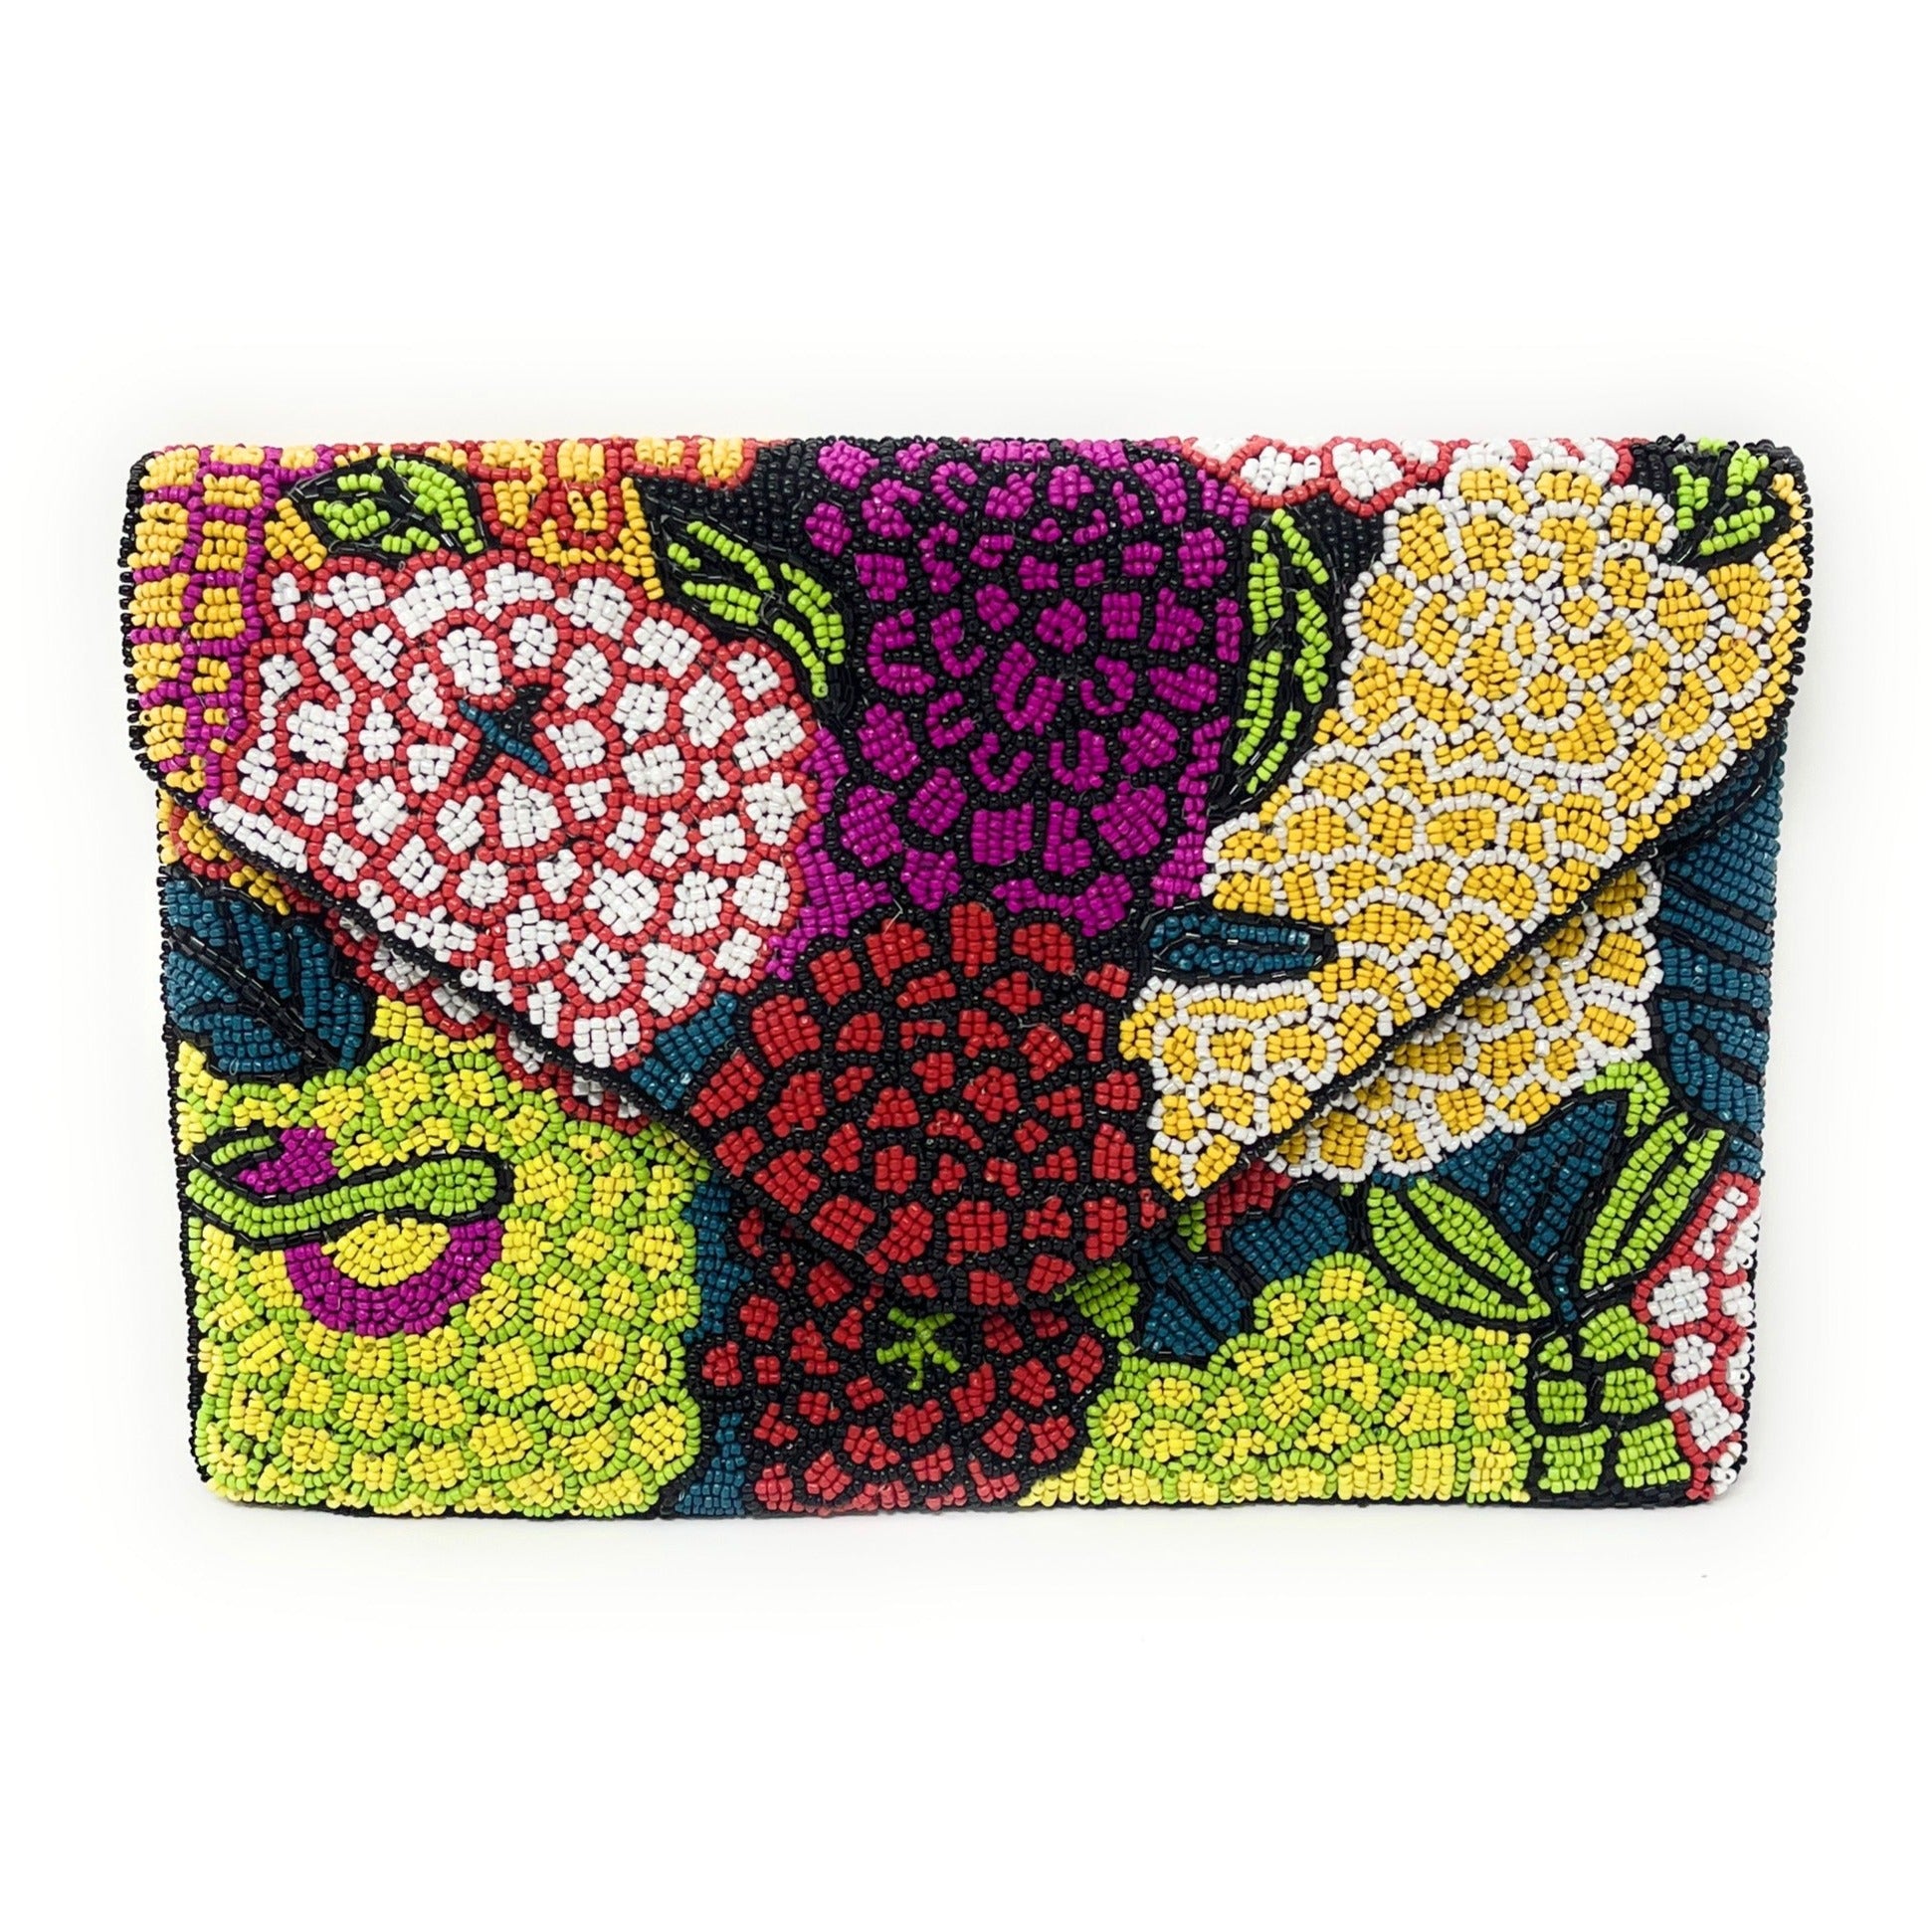 Floral Beaded Clutch, Seed Bead Clutch Bag, Evening Bags, Party Clutches